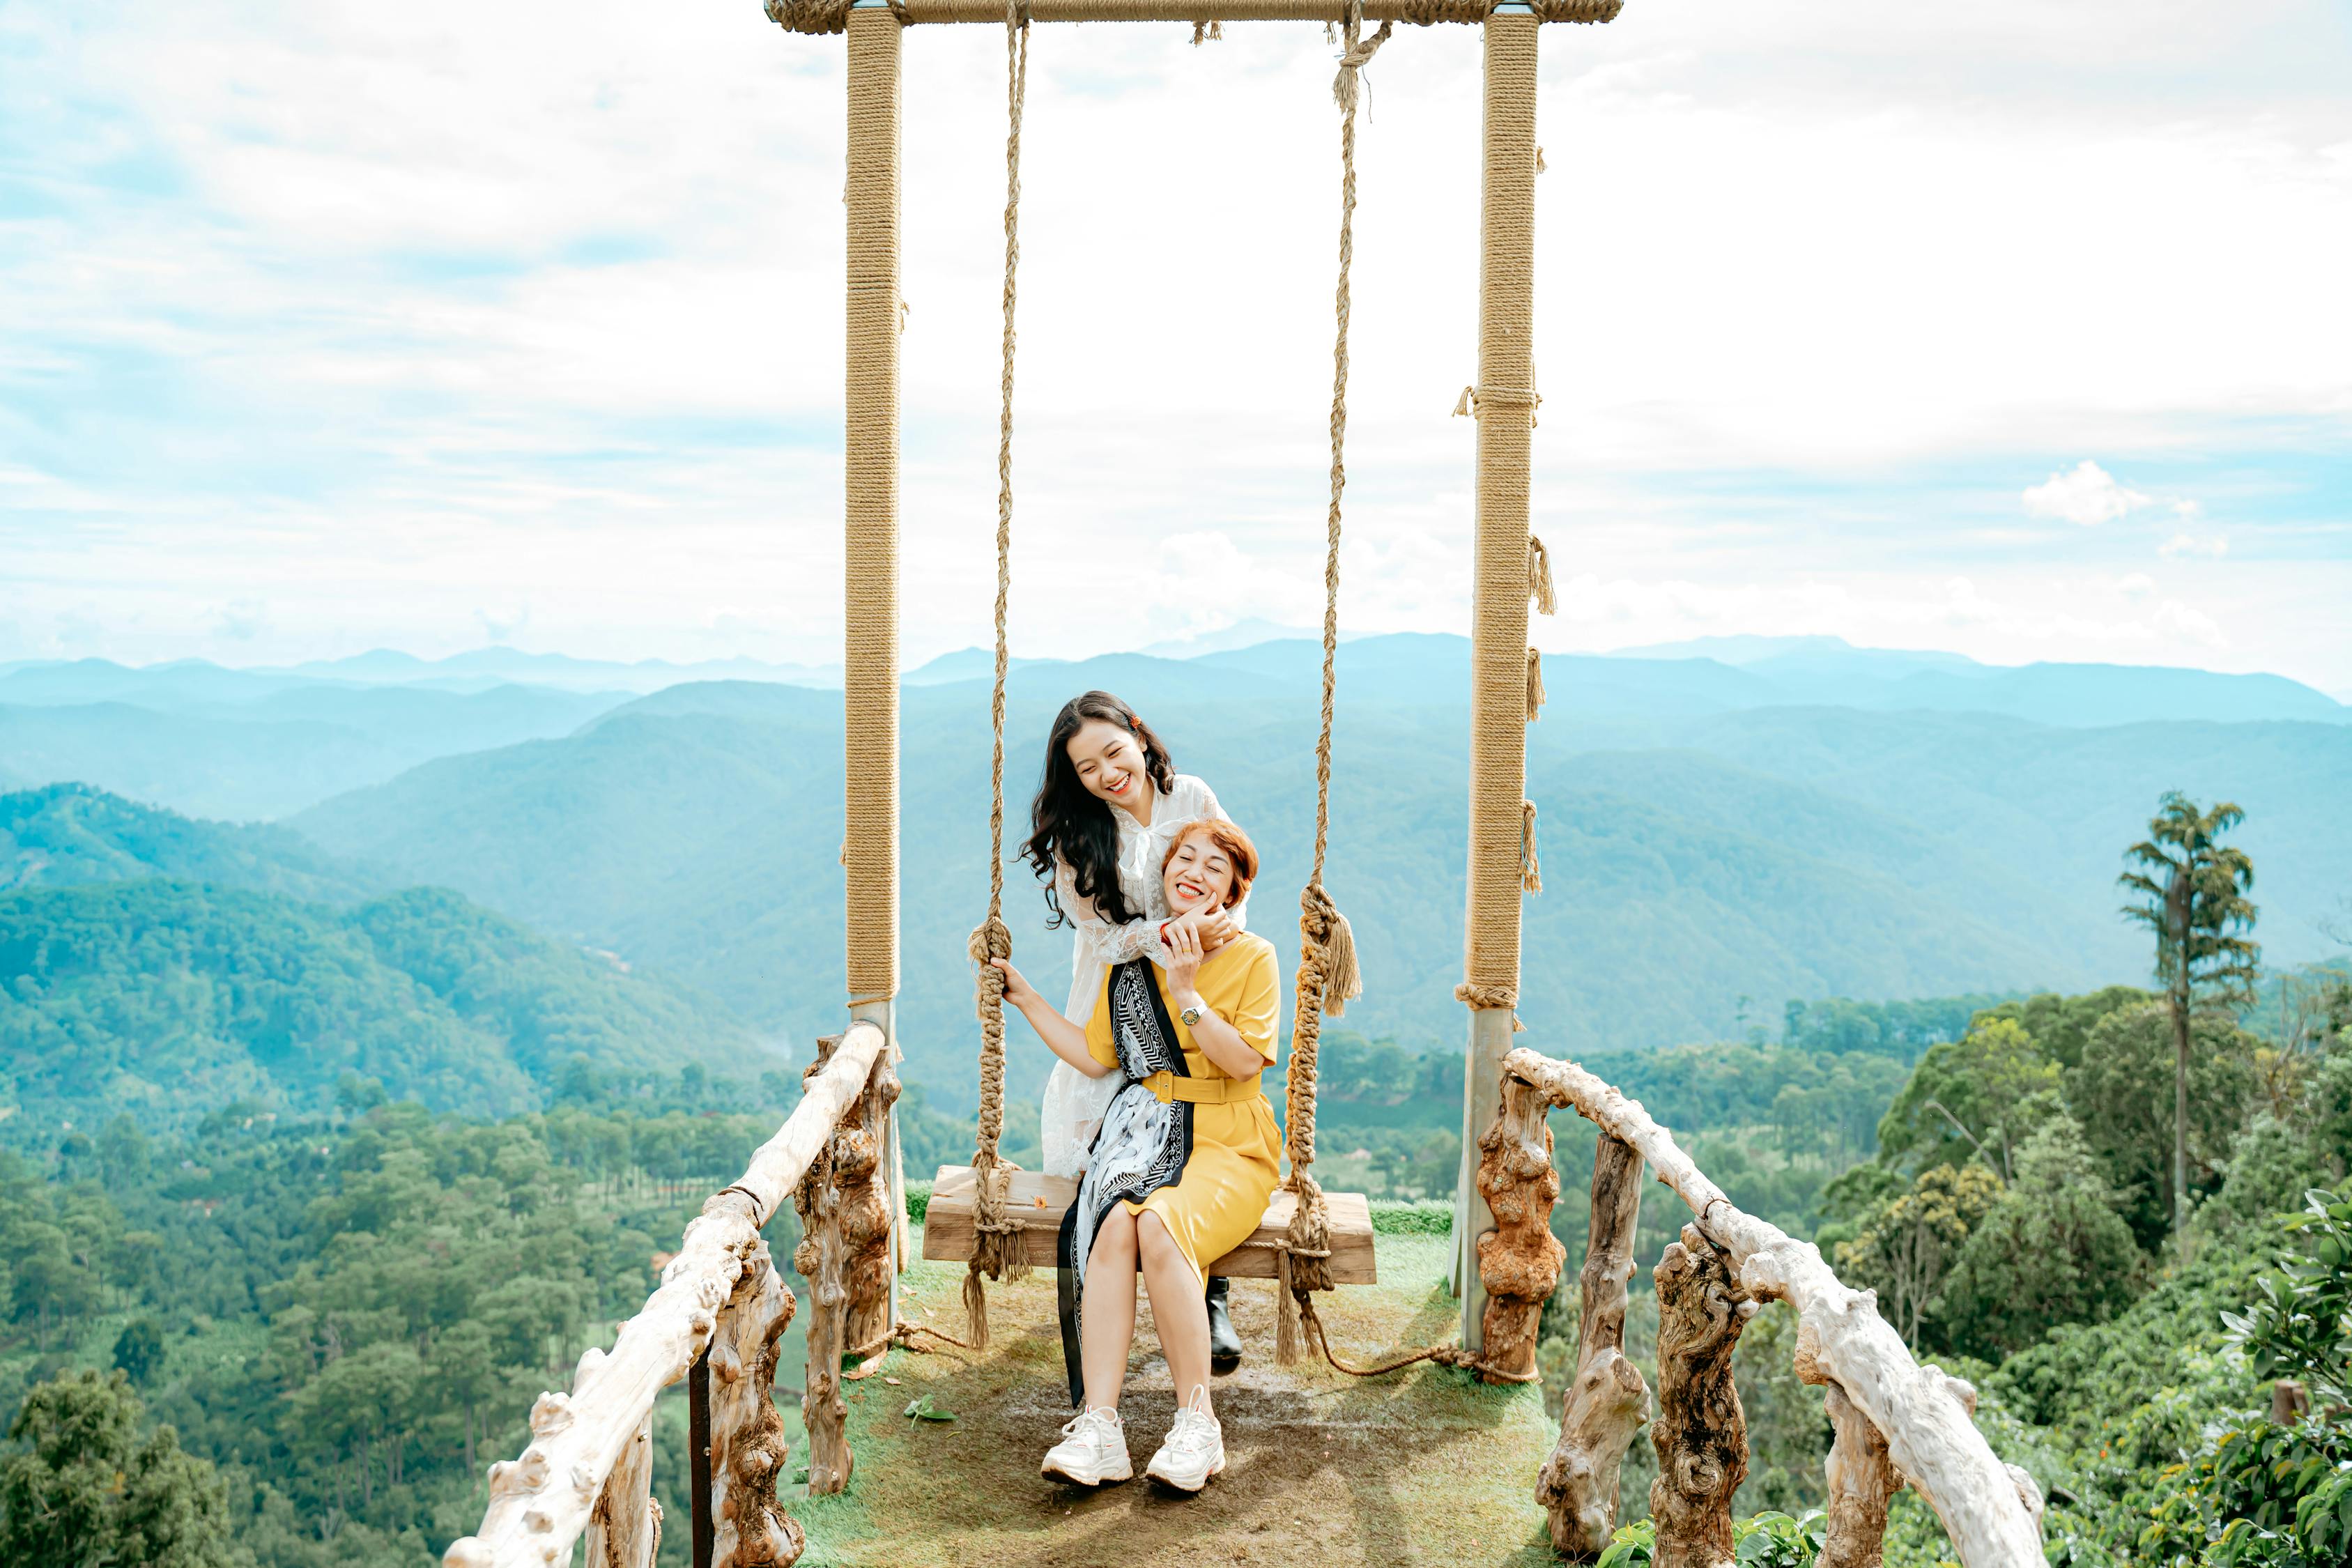 Content Asian mom with daughter on swing against green mounts · Free ...